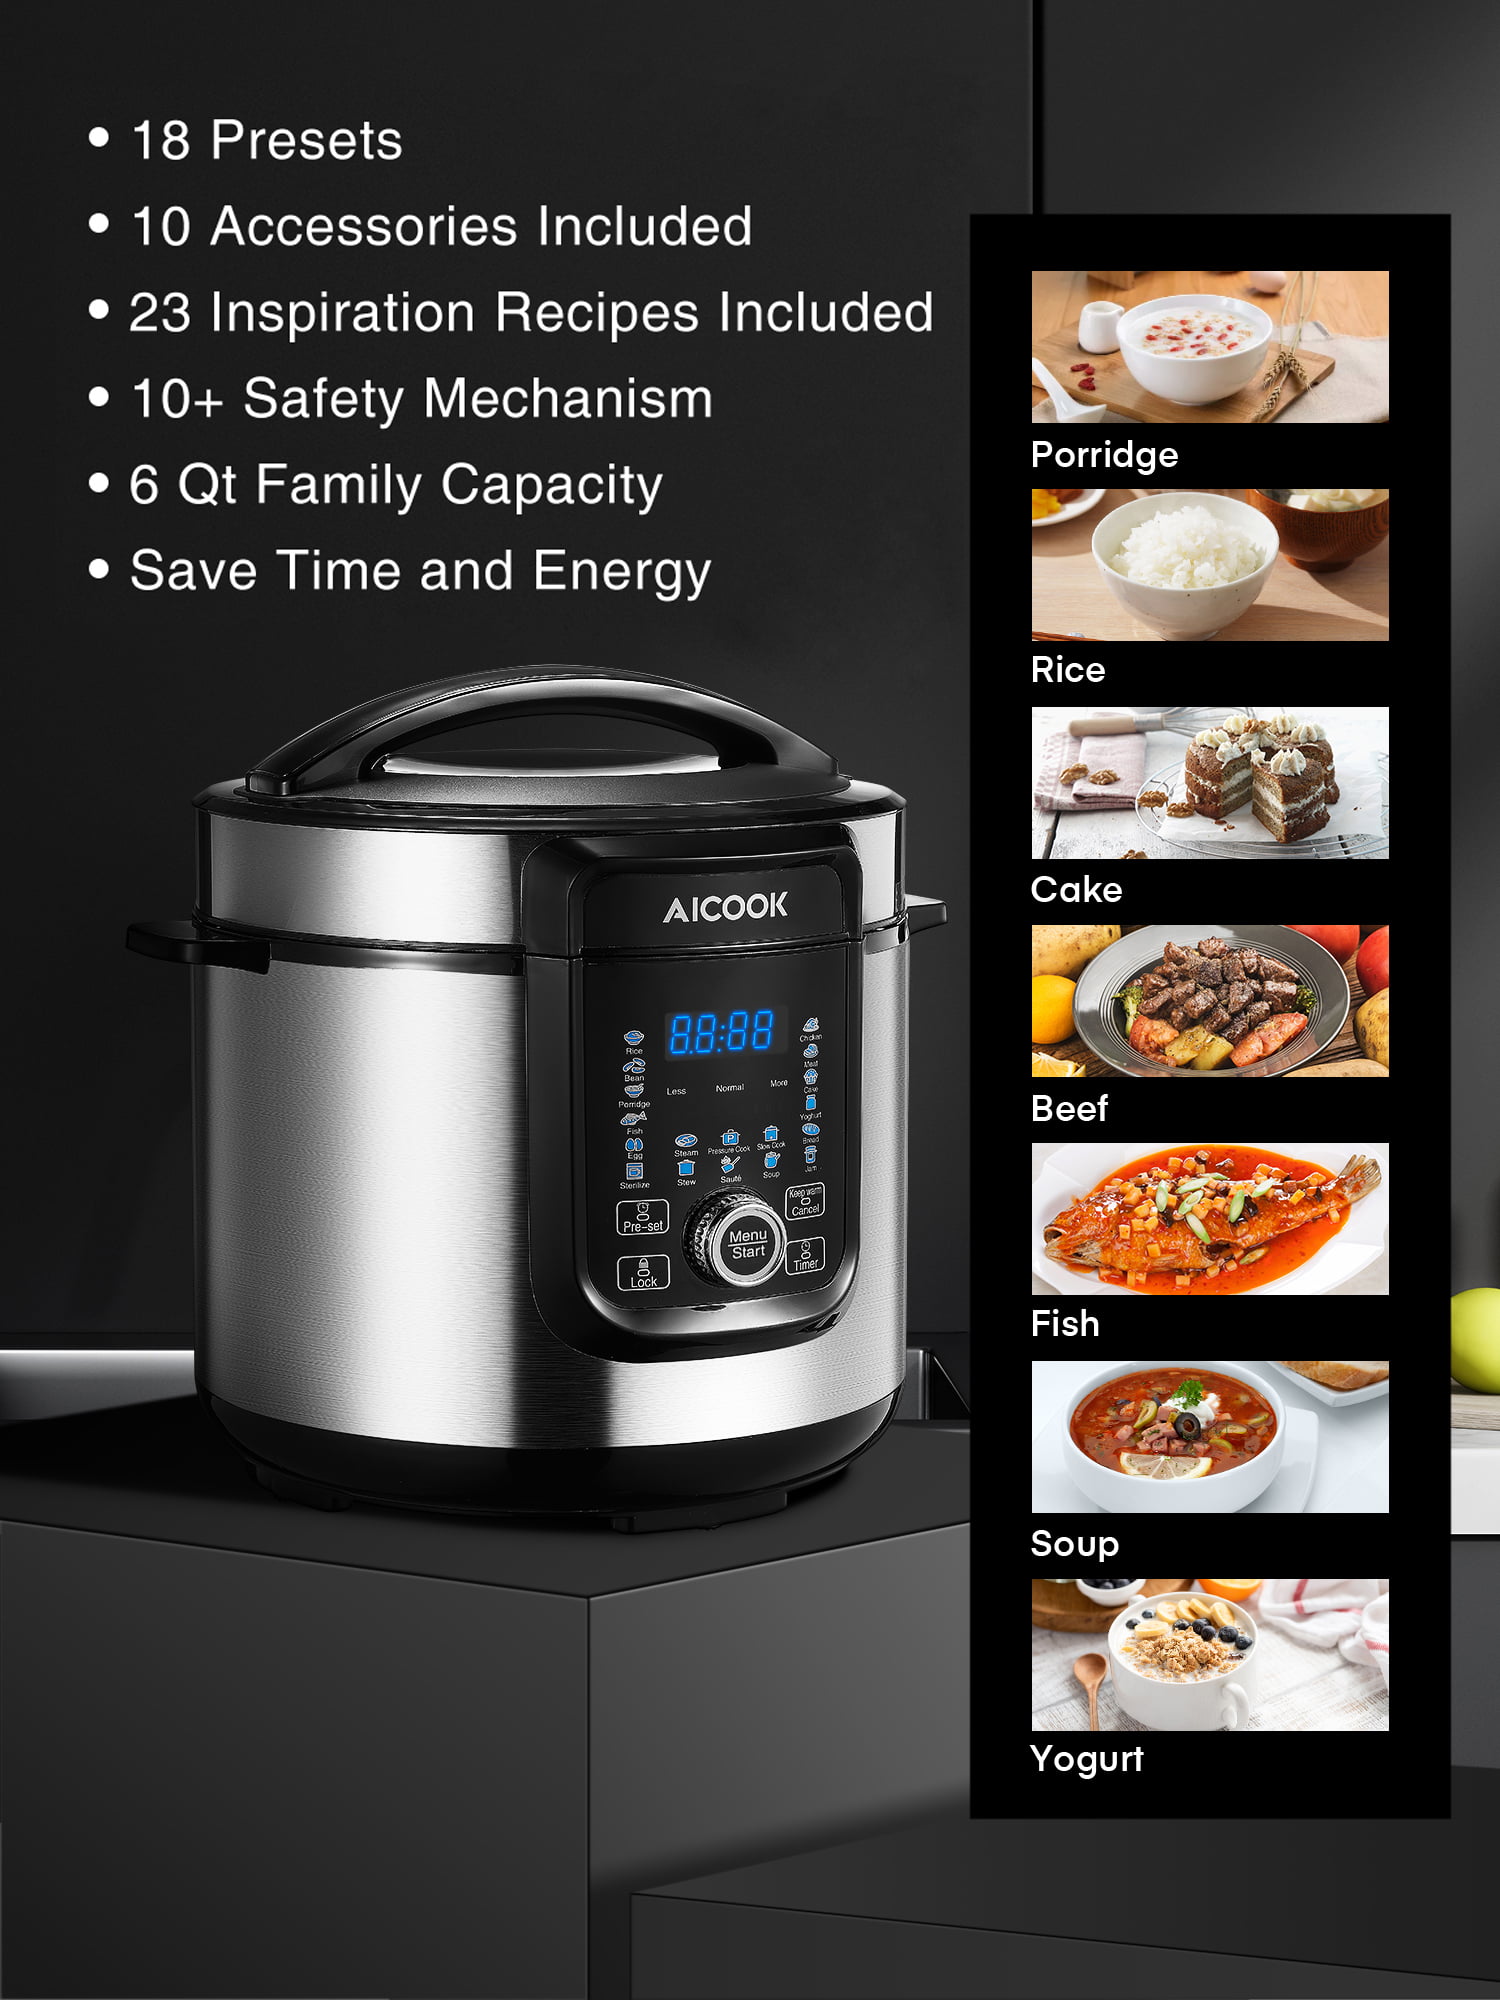  17-In-1 Pressure Cooker 6 Quart Electric Pressure Cooker Air  Fryer Combo, 1500W Slow Cooker, Multicooker, Rice Cooker with Recipe Book,  Nesting Broil Rack/Two Detachable Lids, Smart LED Touchscreen : Home 